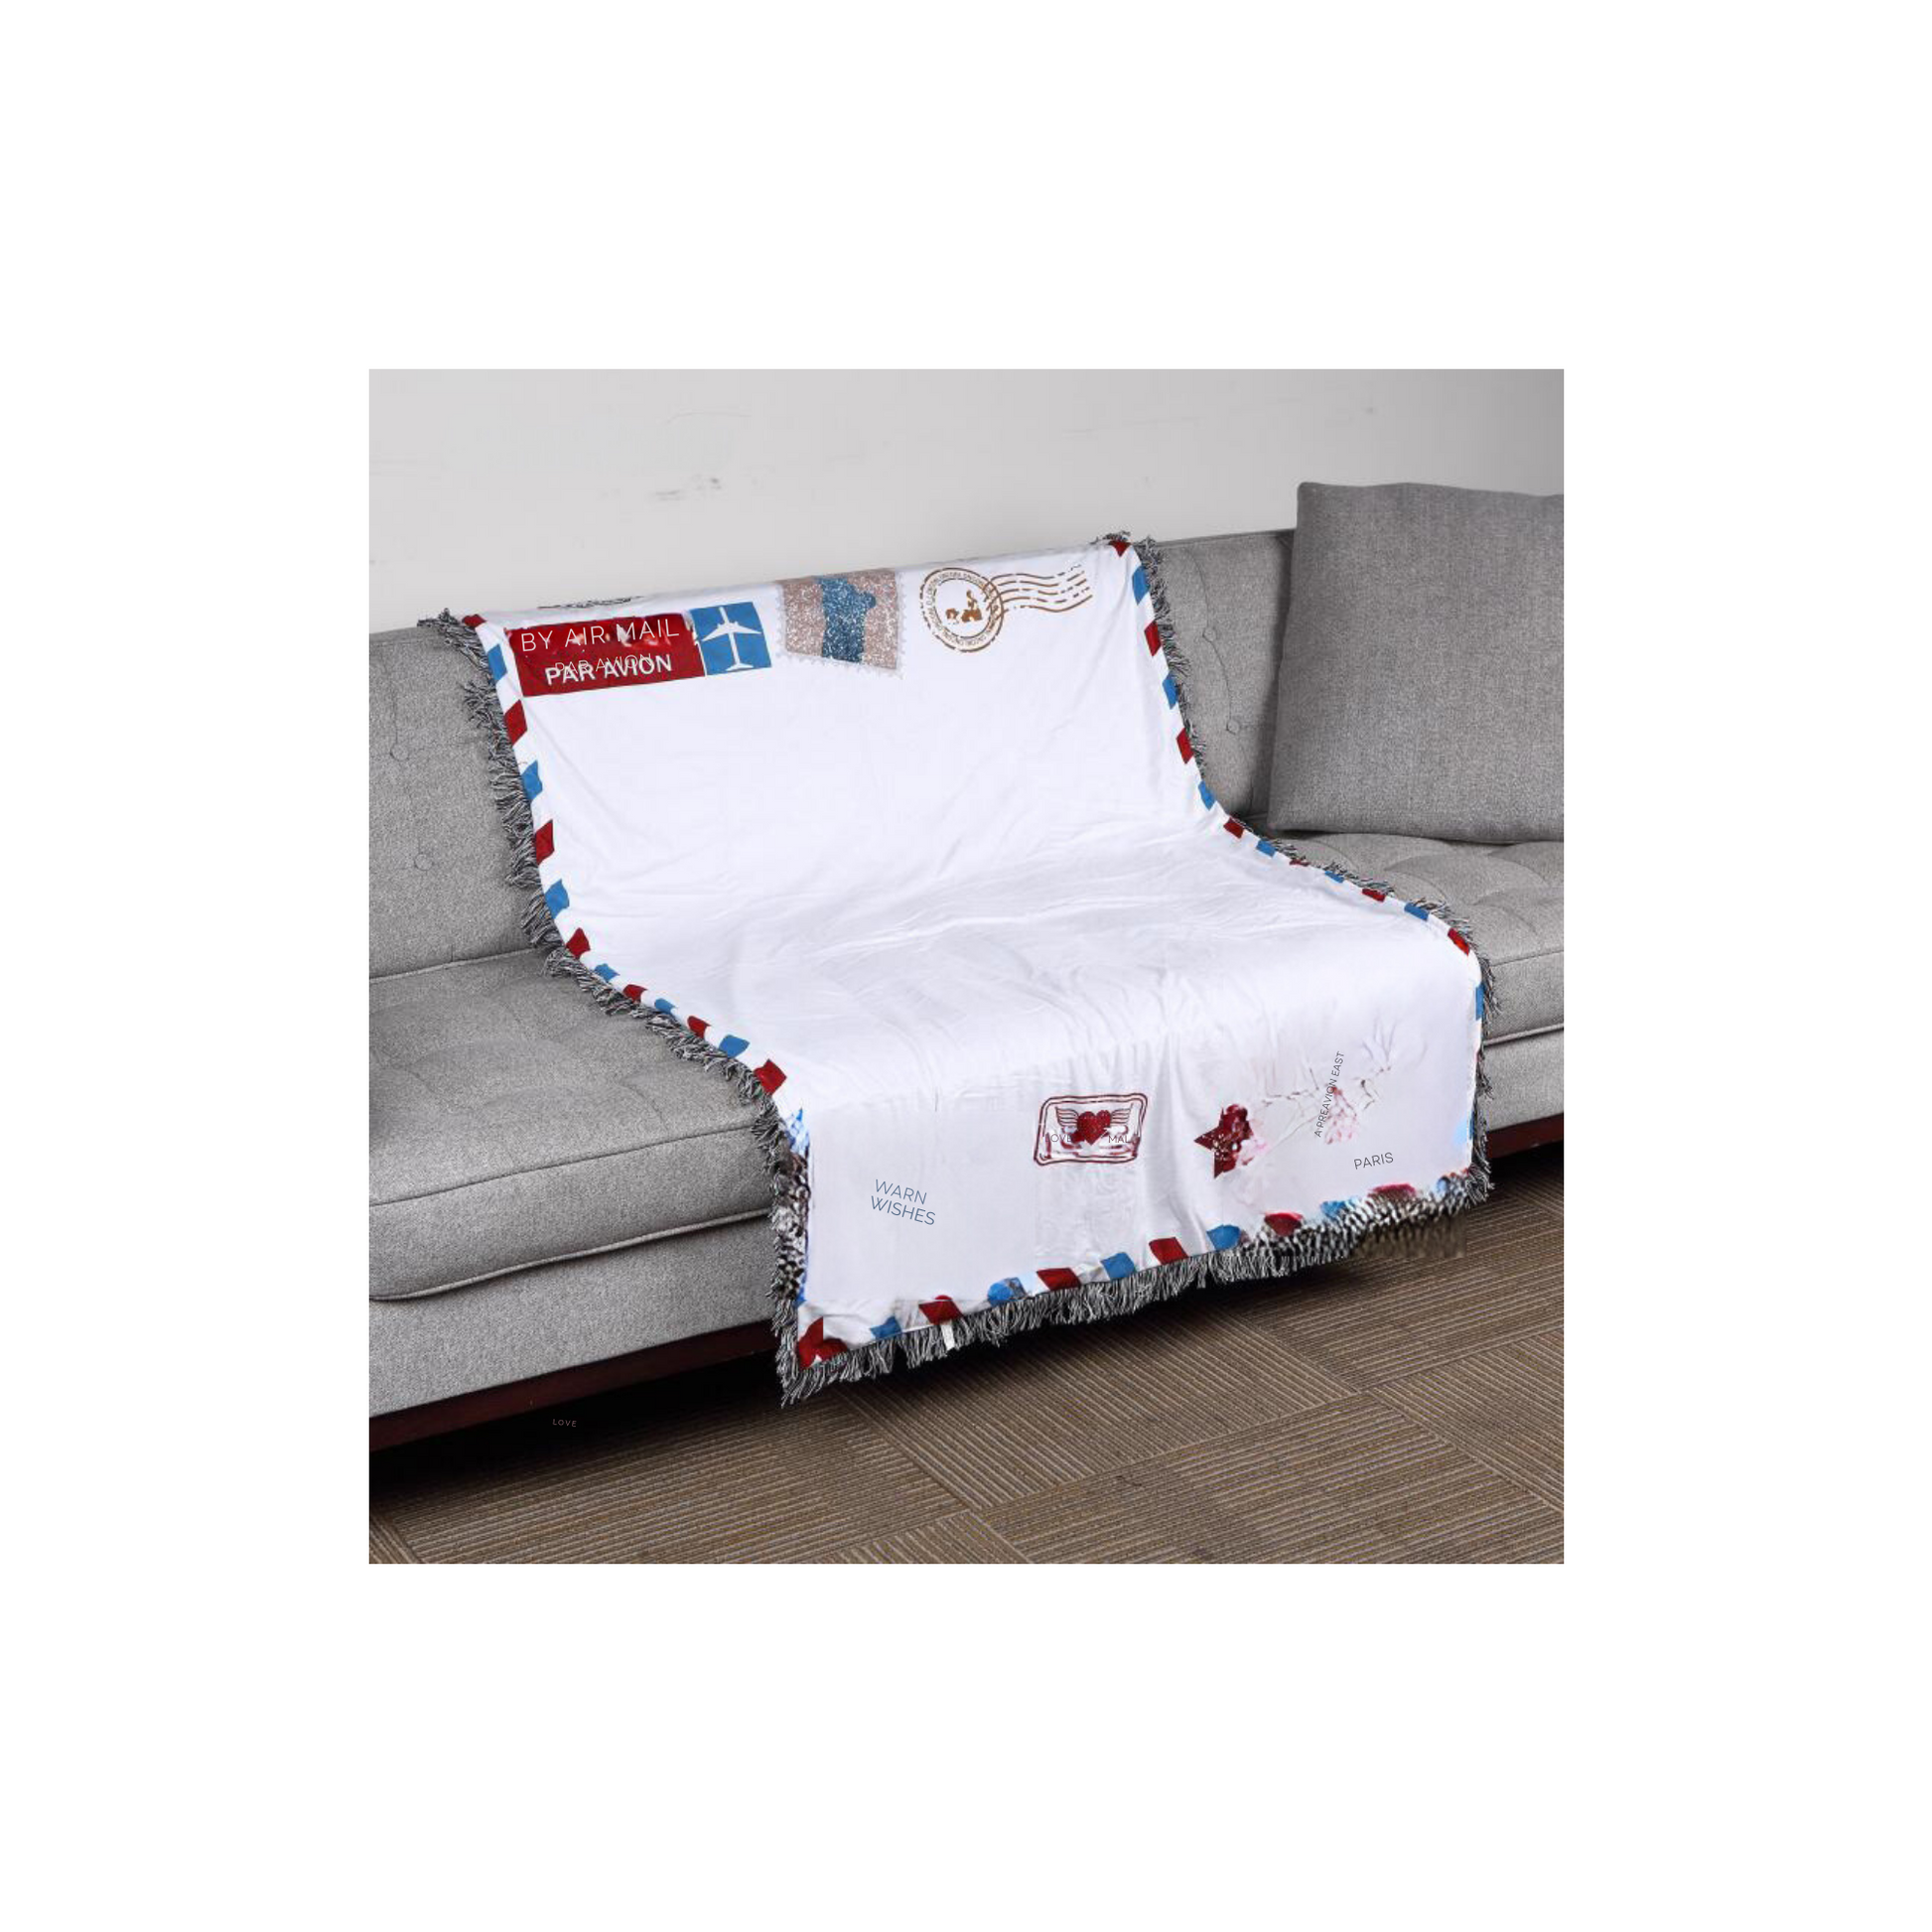 Blanket Sublimation 20 Panel (Cheetah and Sunflower Borders